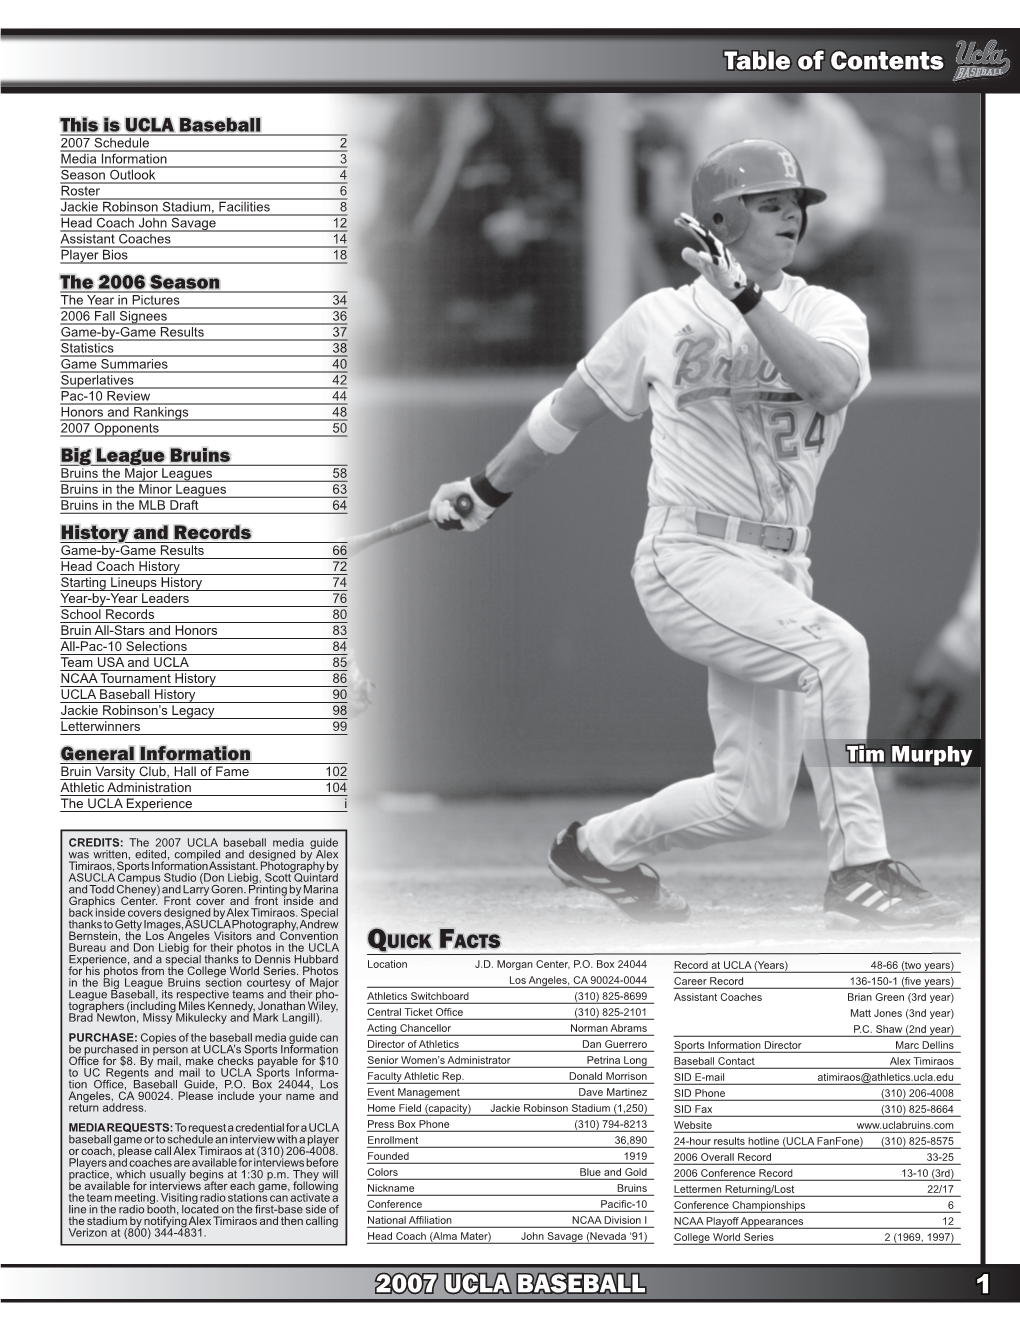 2007 UCLA BASEBALL 1 Table of Contents